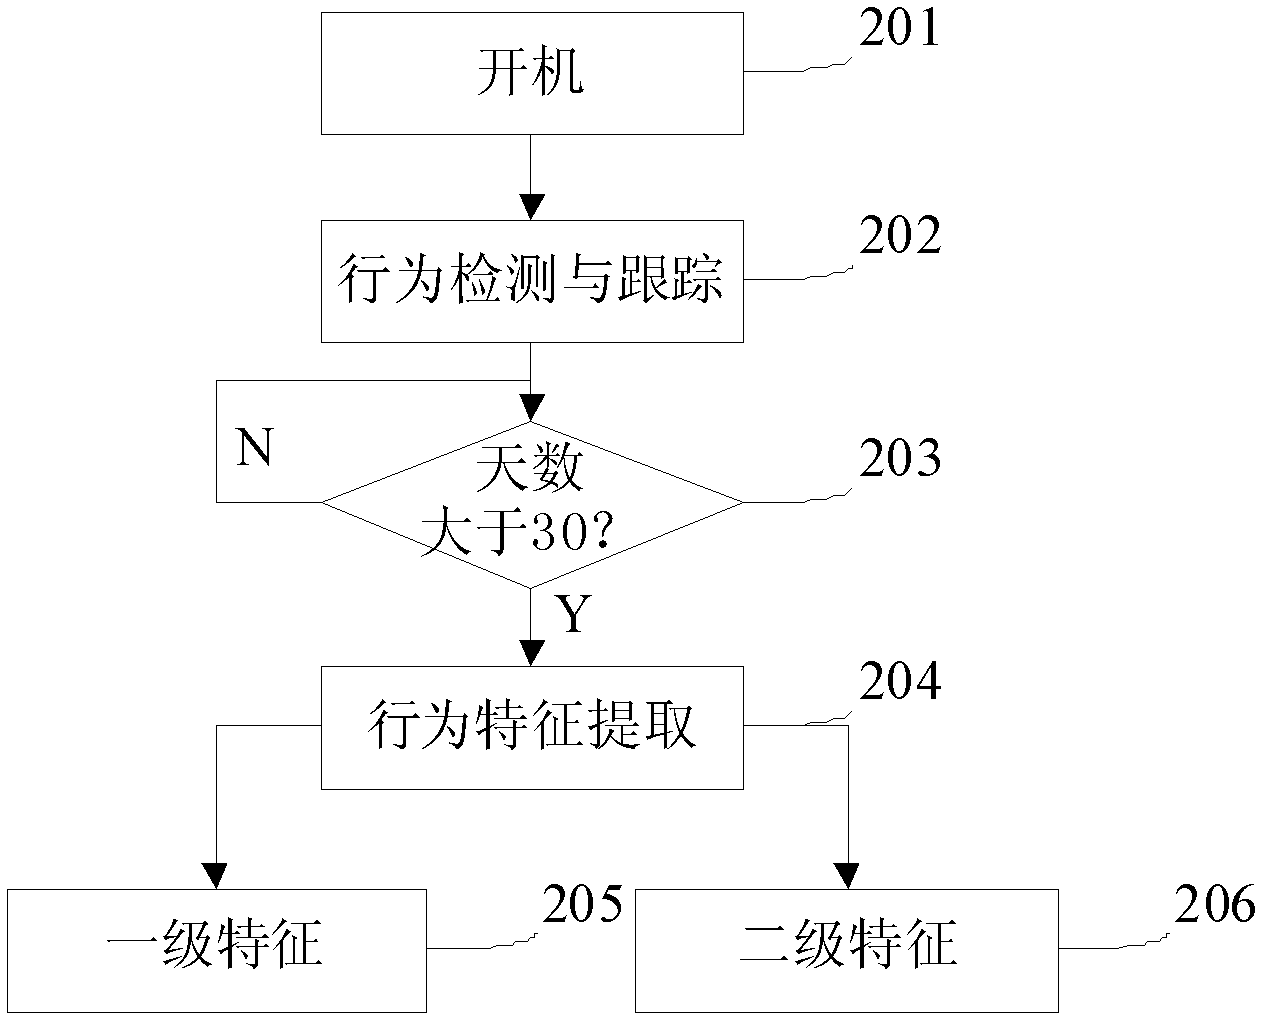 Mobile terminal and user identity identification method